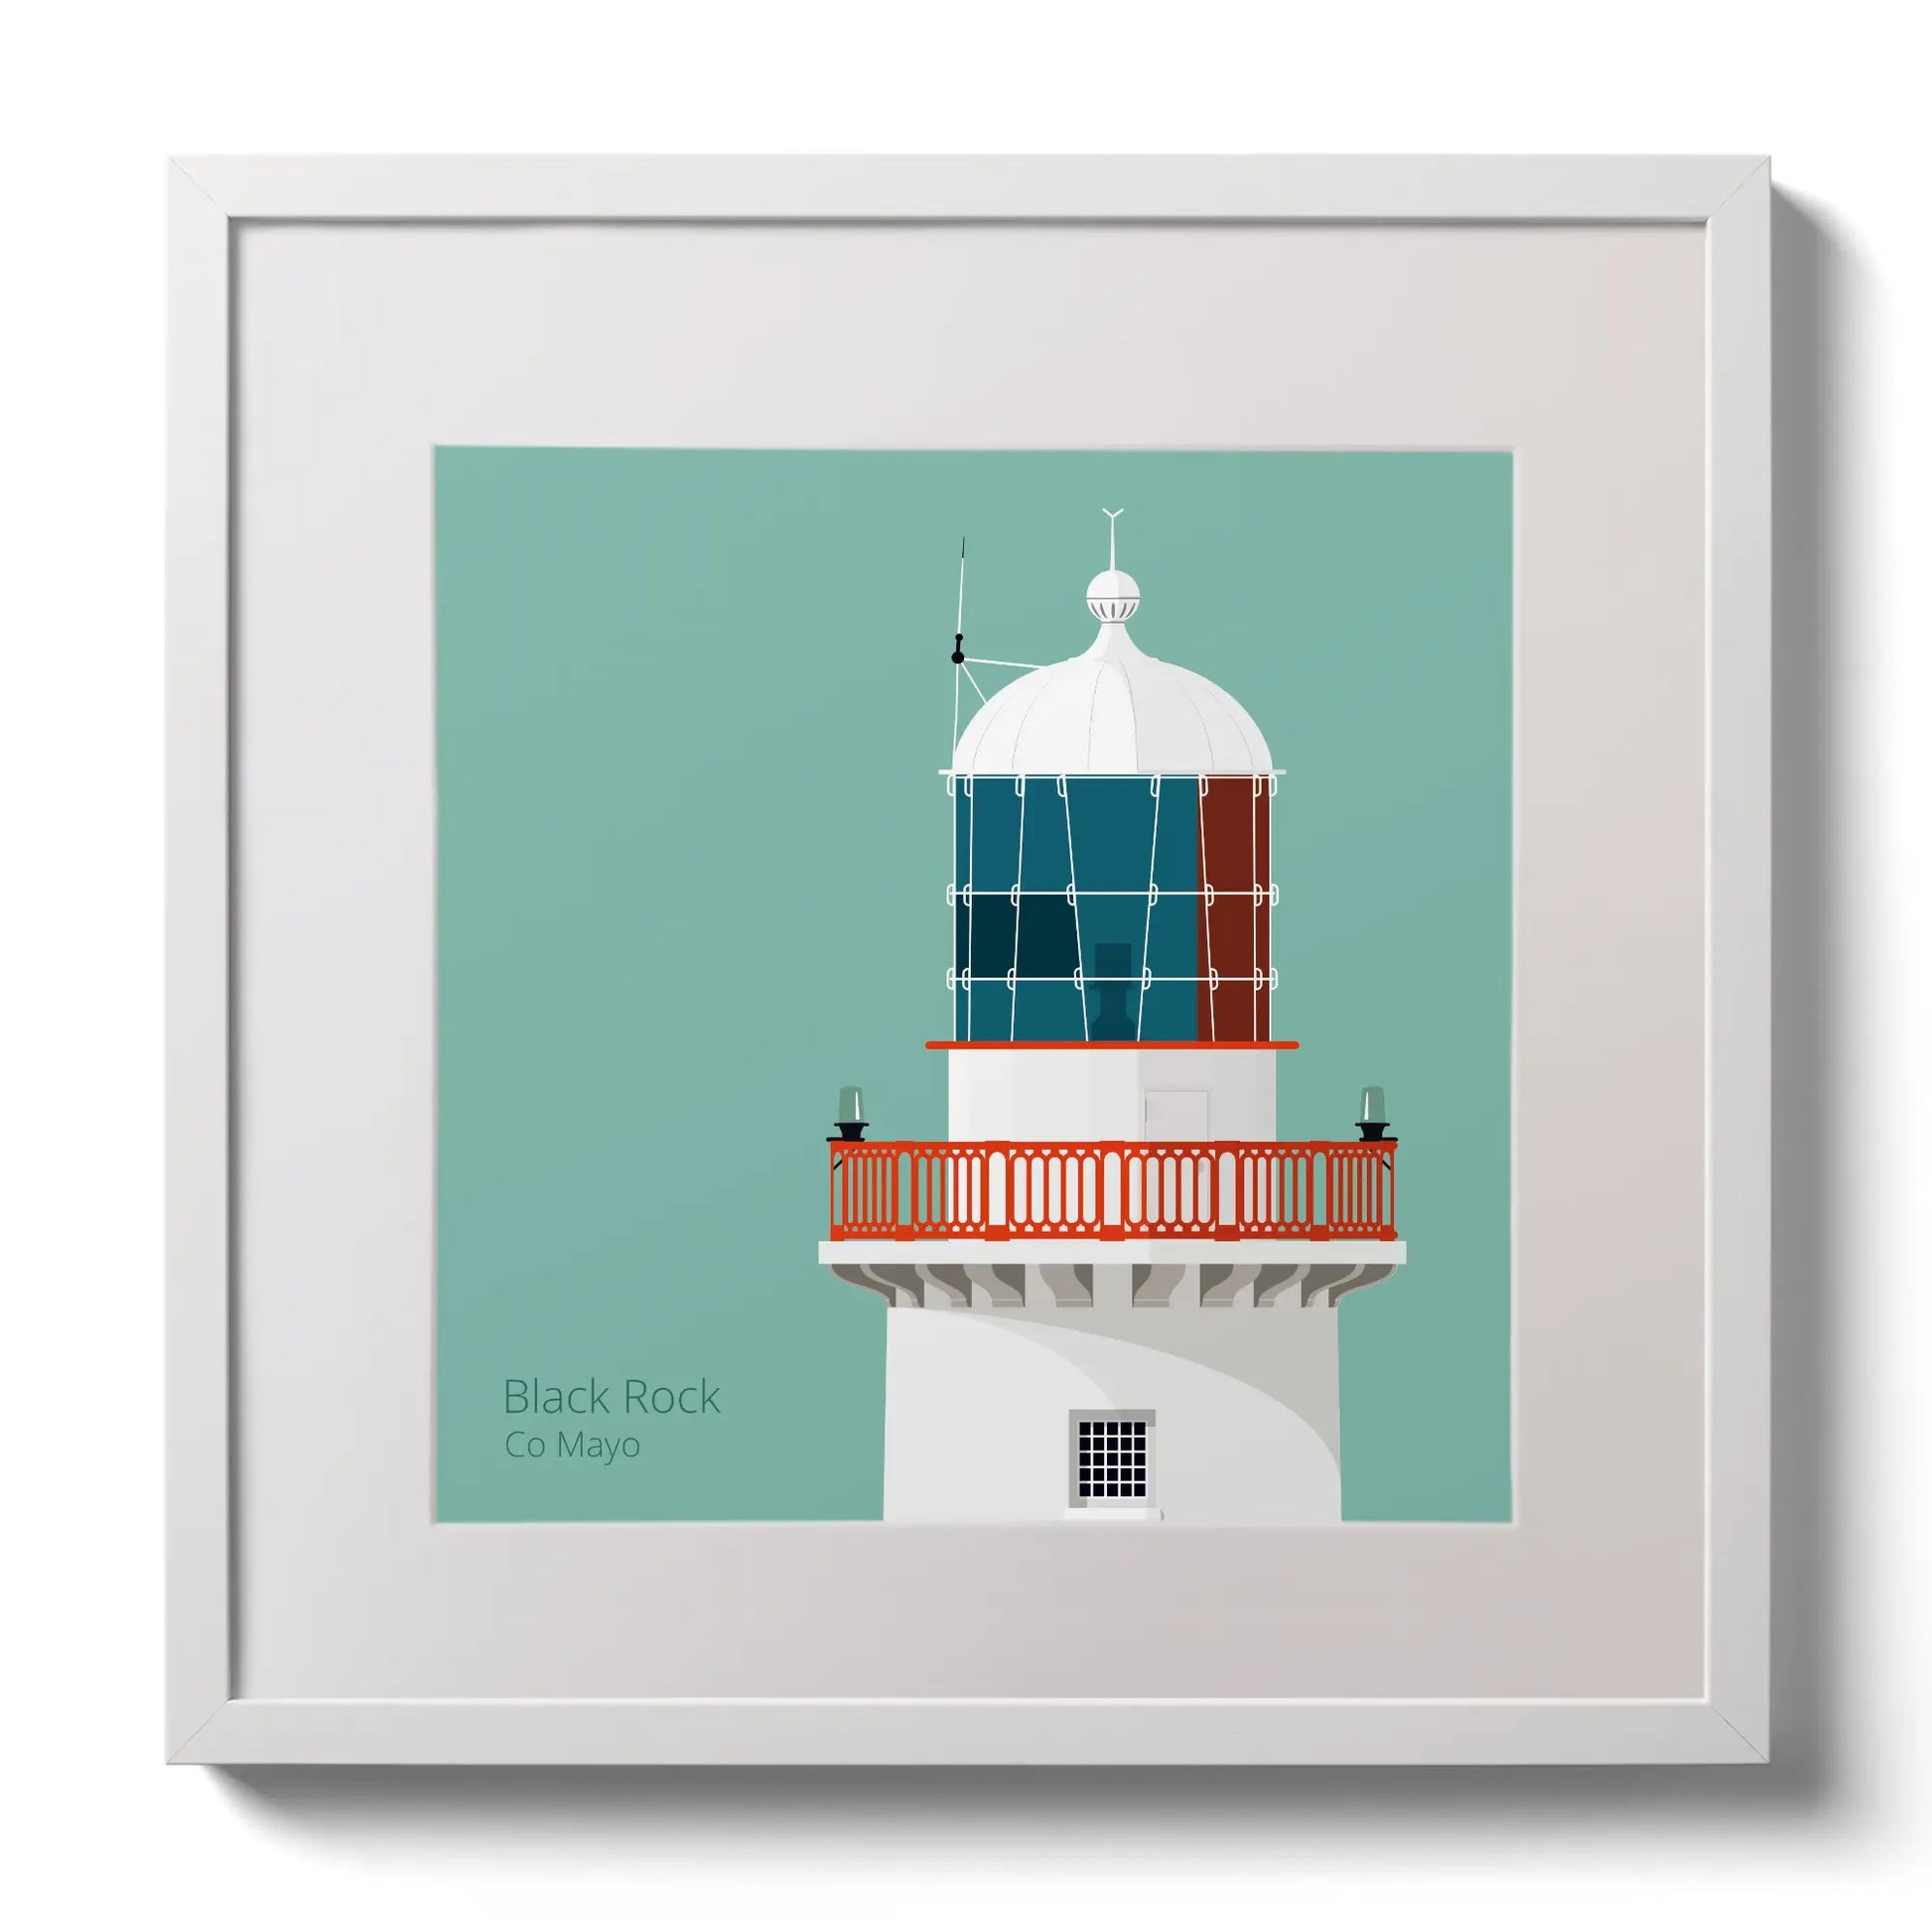 Illustration of Black Rock lighthouse on an ocean green background,  in a white square frame measuring 30x30cm.